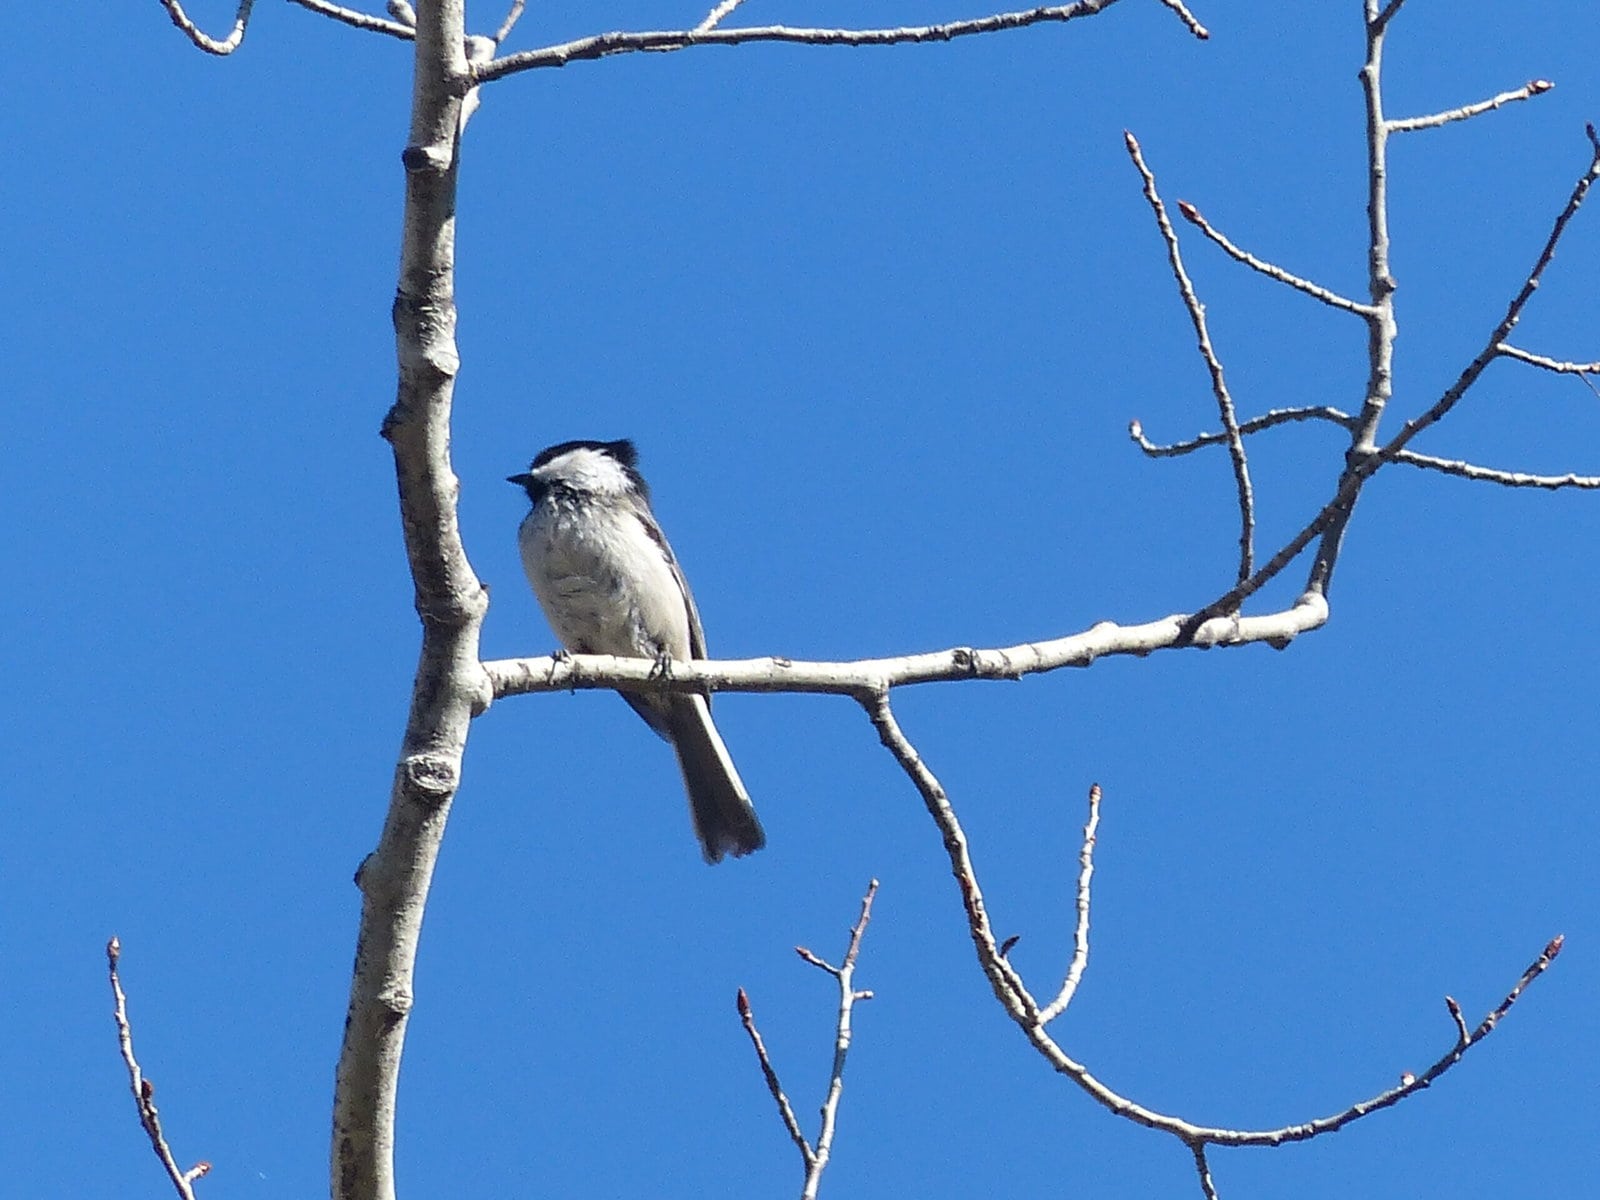 Black capped chickadee sitting on branch with blue sky background